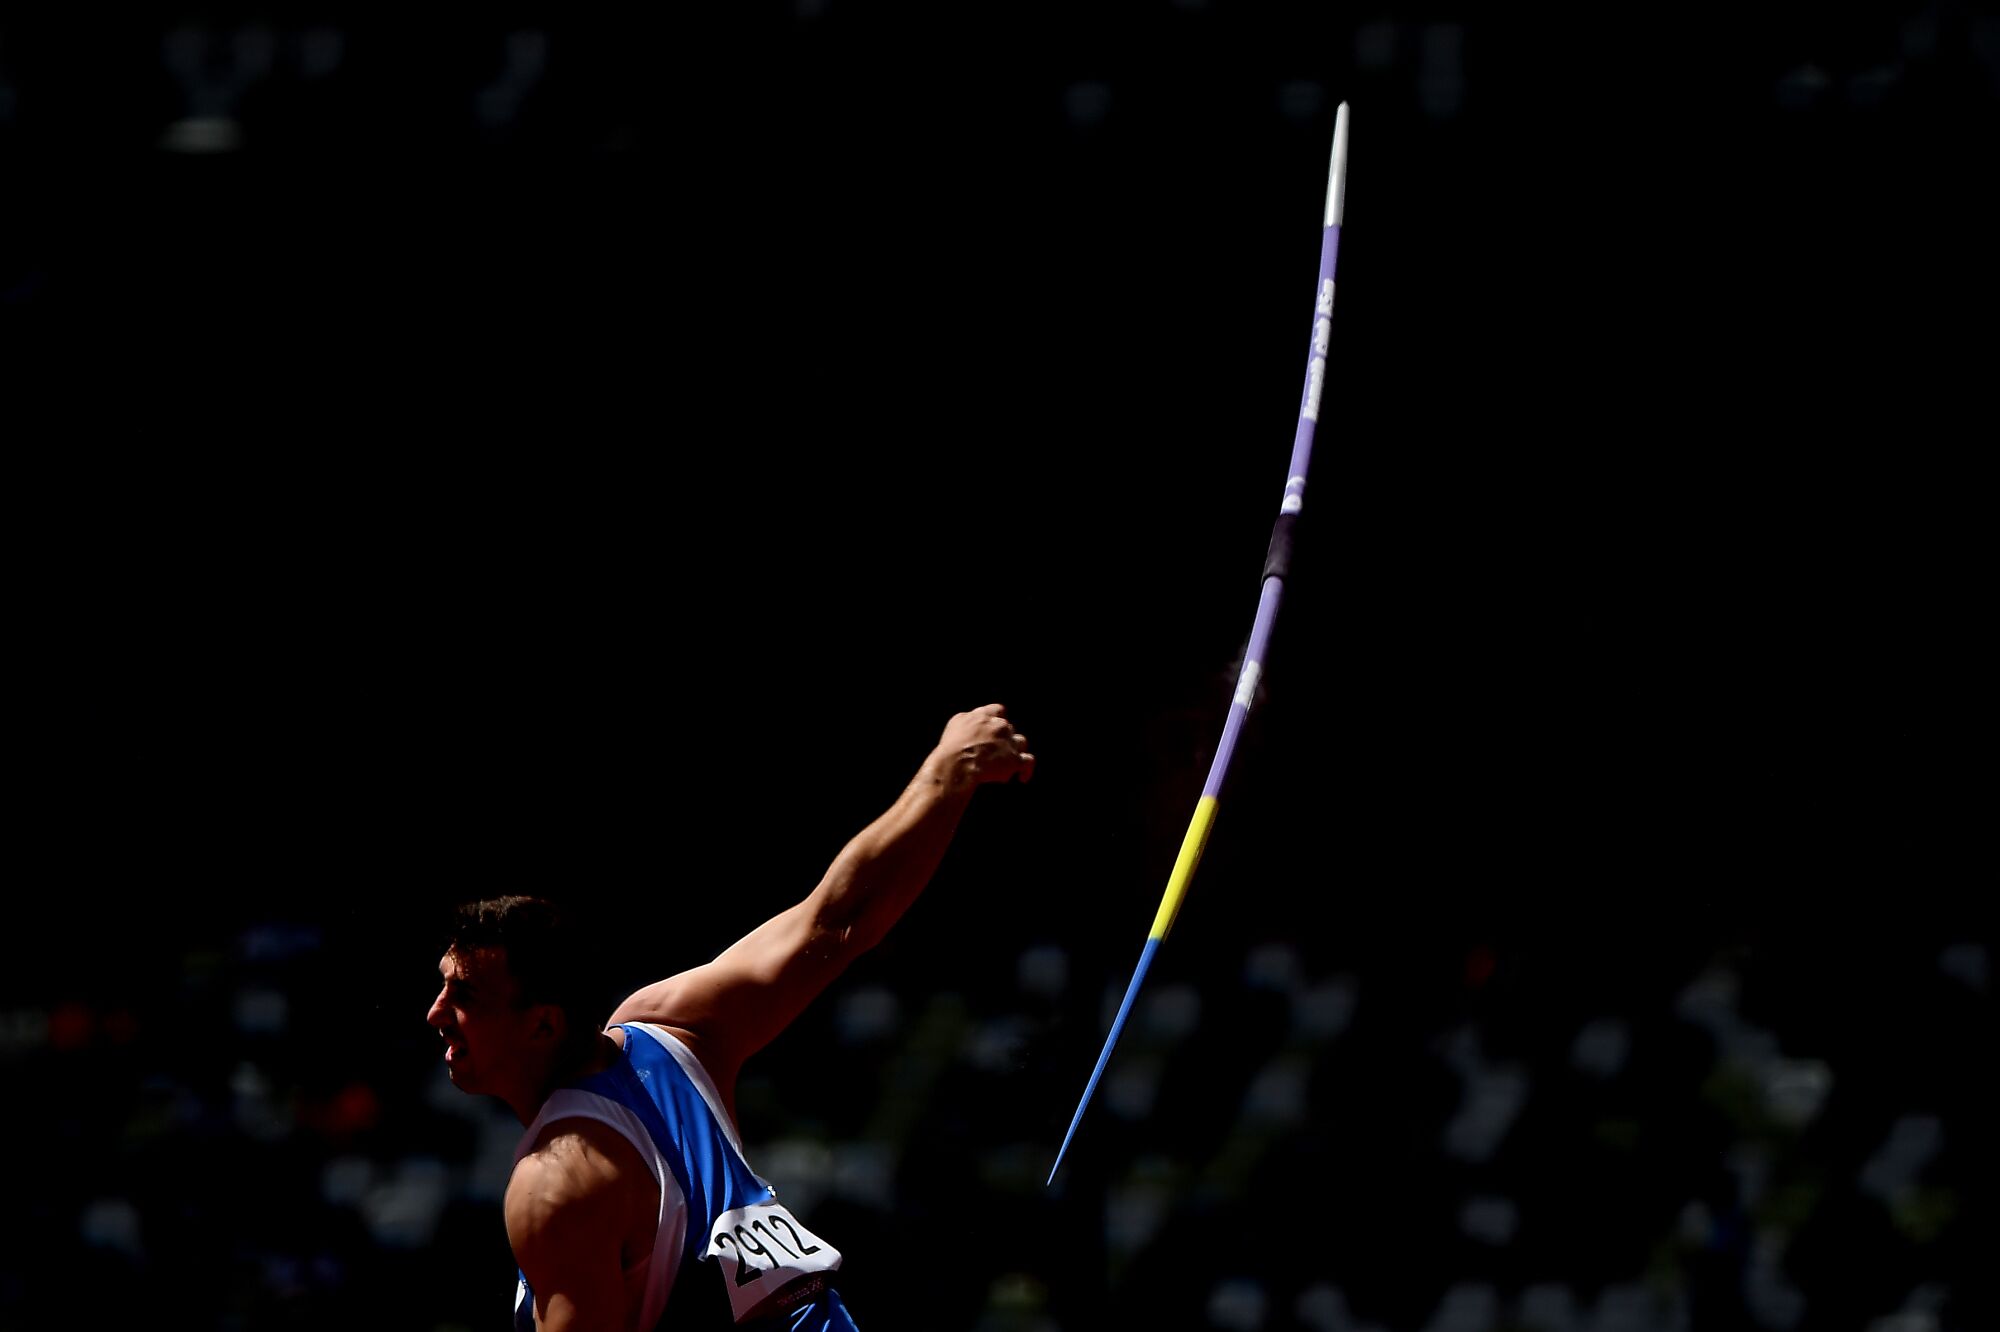 Moldova's Anddrian Mardare makes a throw in the men's javelin throw qualification.